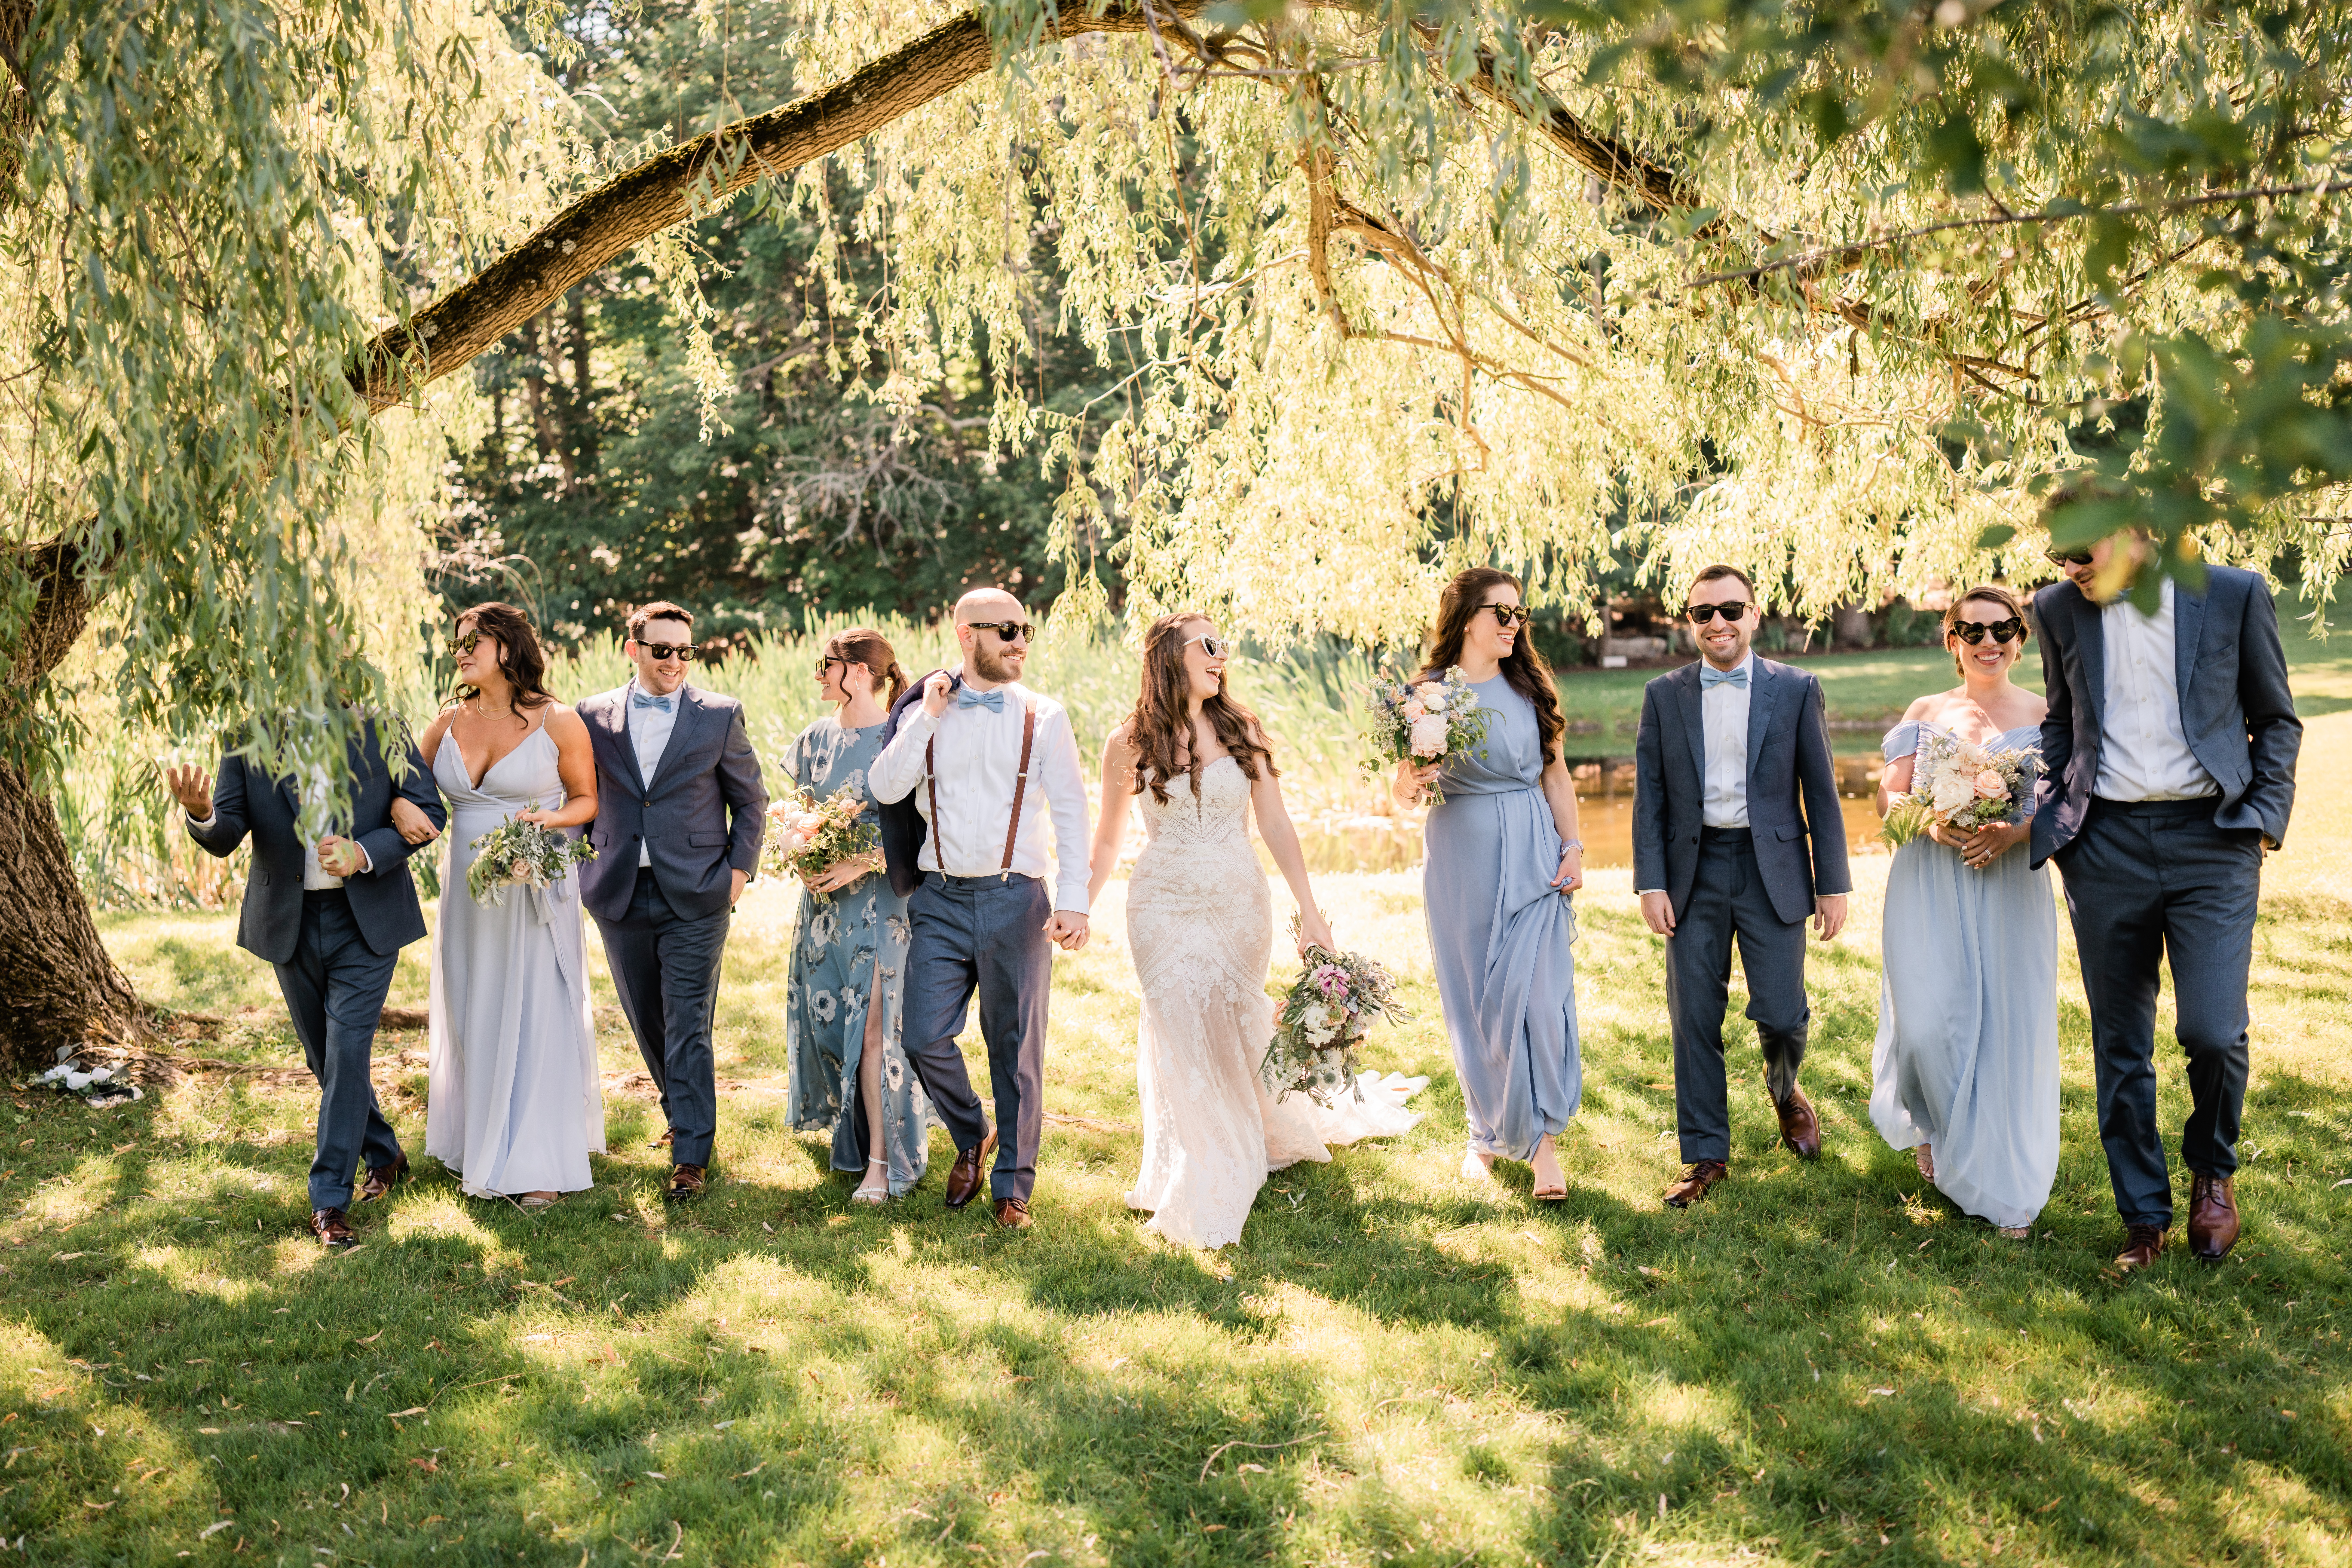 Perona Farms Wedding, Perona Farms Wedding Photographer, NJ Weddings, New Jersey Wedding Photographer, Perona Farms Refinery Wedding Photographer, NJ Wedding Photographer, Perona Farms Reserve Wedding Photographer, New Jersey Wedding Venues, Perona Farms Barn Wedding Photography, Wedding Inspiration, Wedding Planning, Unique Wedding Photos, Wedding Photo Ideas, group photograph of bride and groom wearing sunglasses and walking + laughing with their wedding party under a Willow tree at Perona Farms